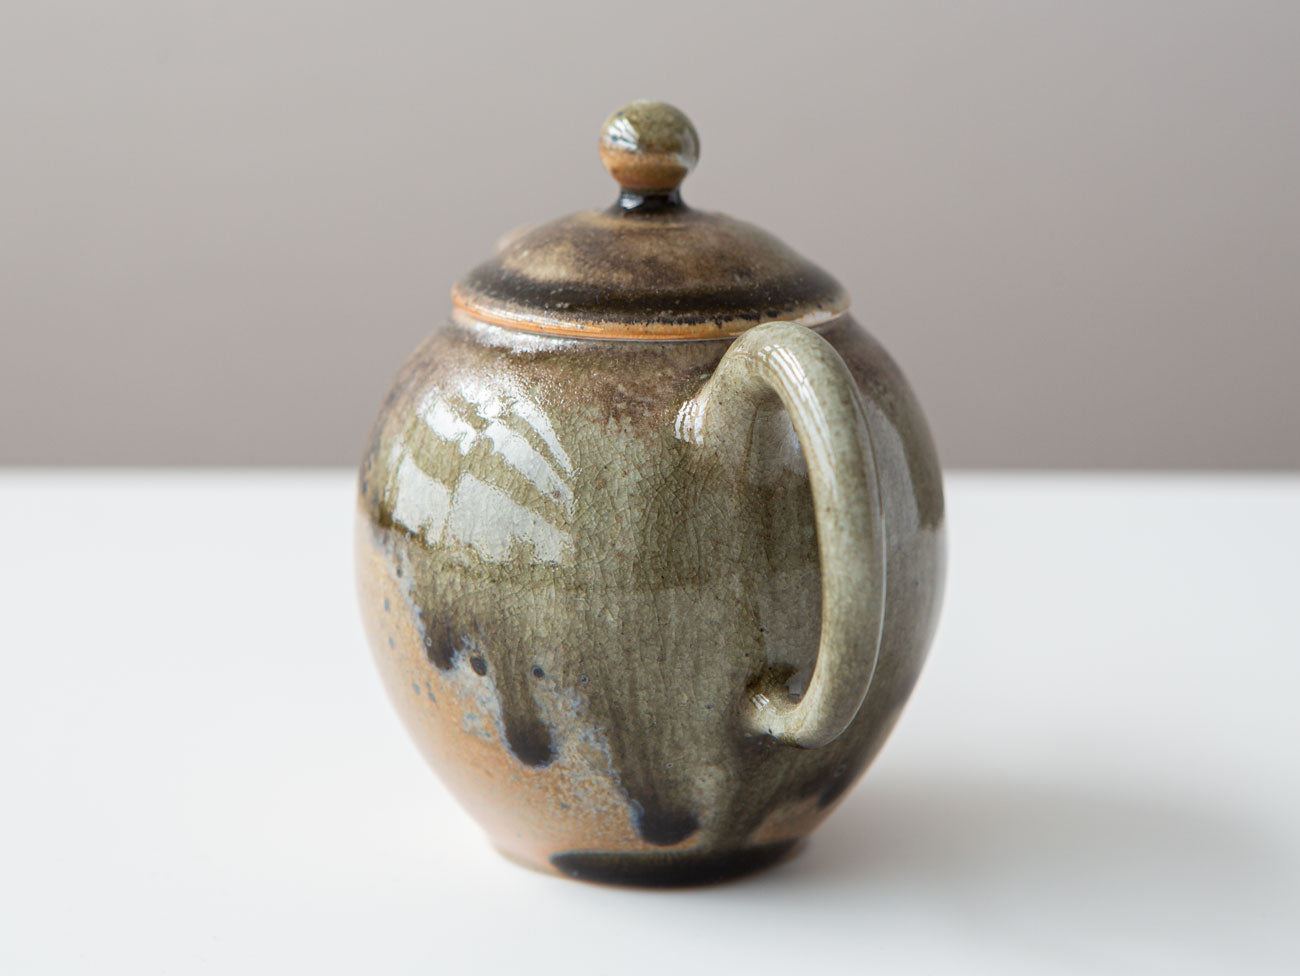 Honey. Rear of teapot. Beautiful glaze crazing, coloration, and running drips.